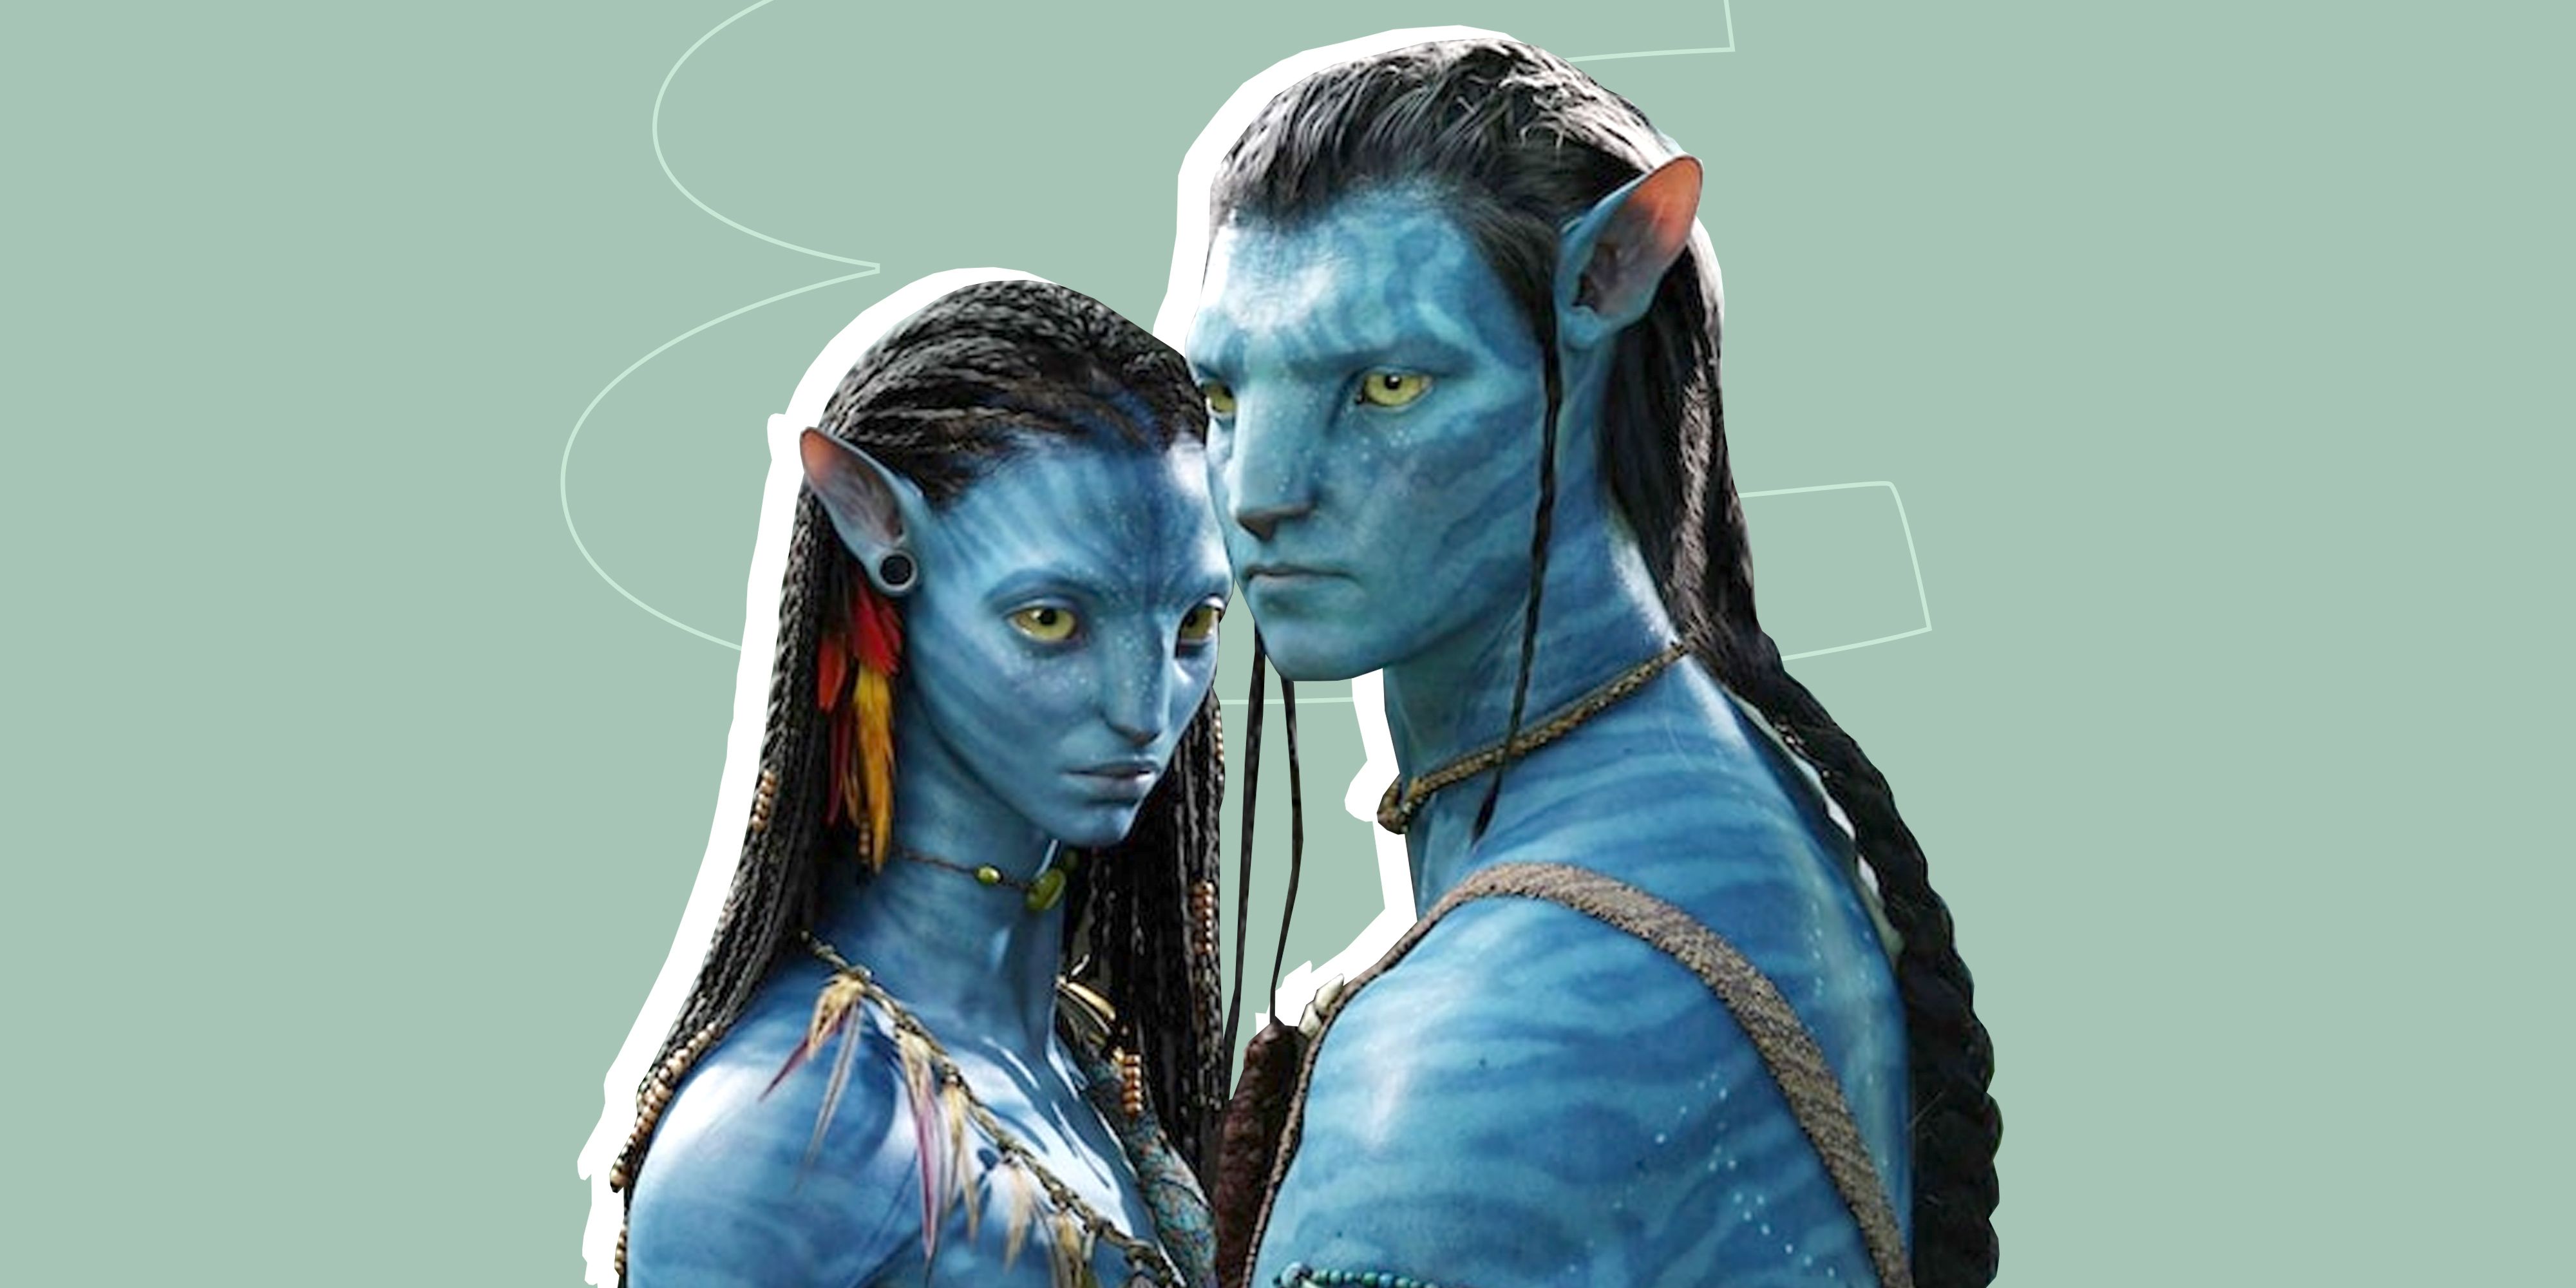 Avatar 1 vs Avatar 2 The Way of Water  Budget Ratings and more